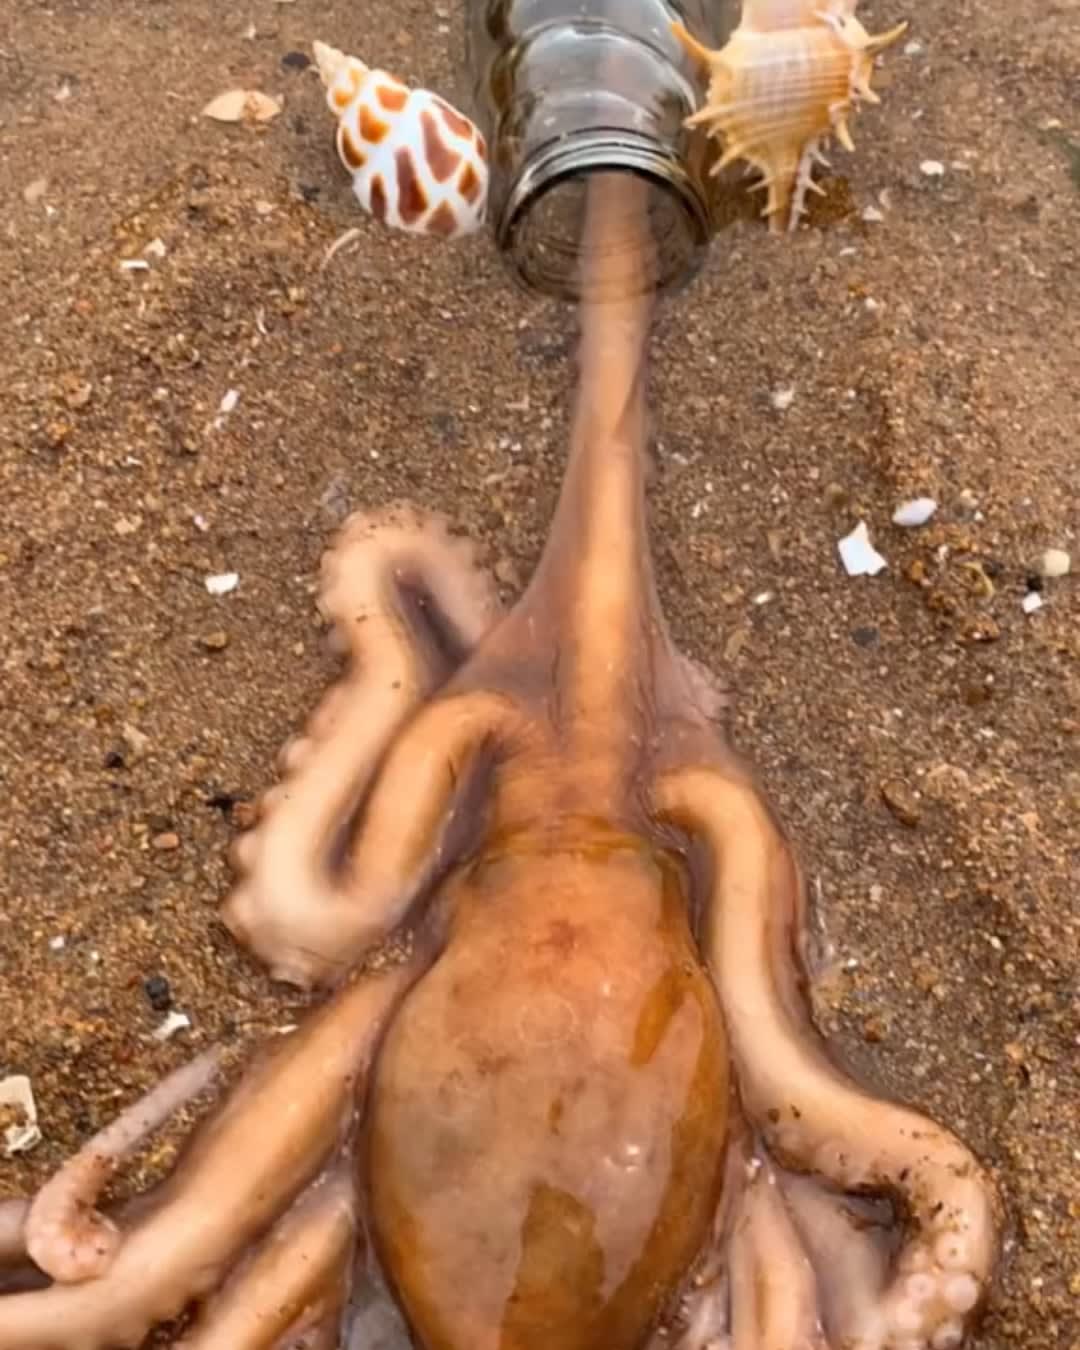 This octopus going into a bottle